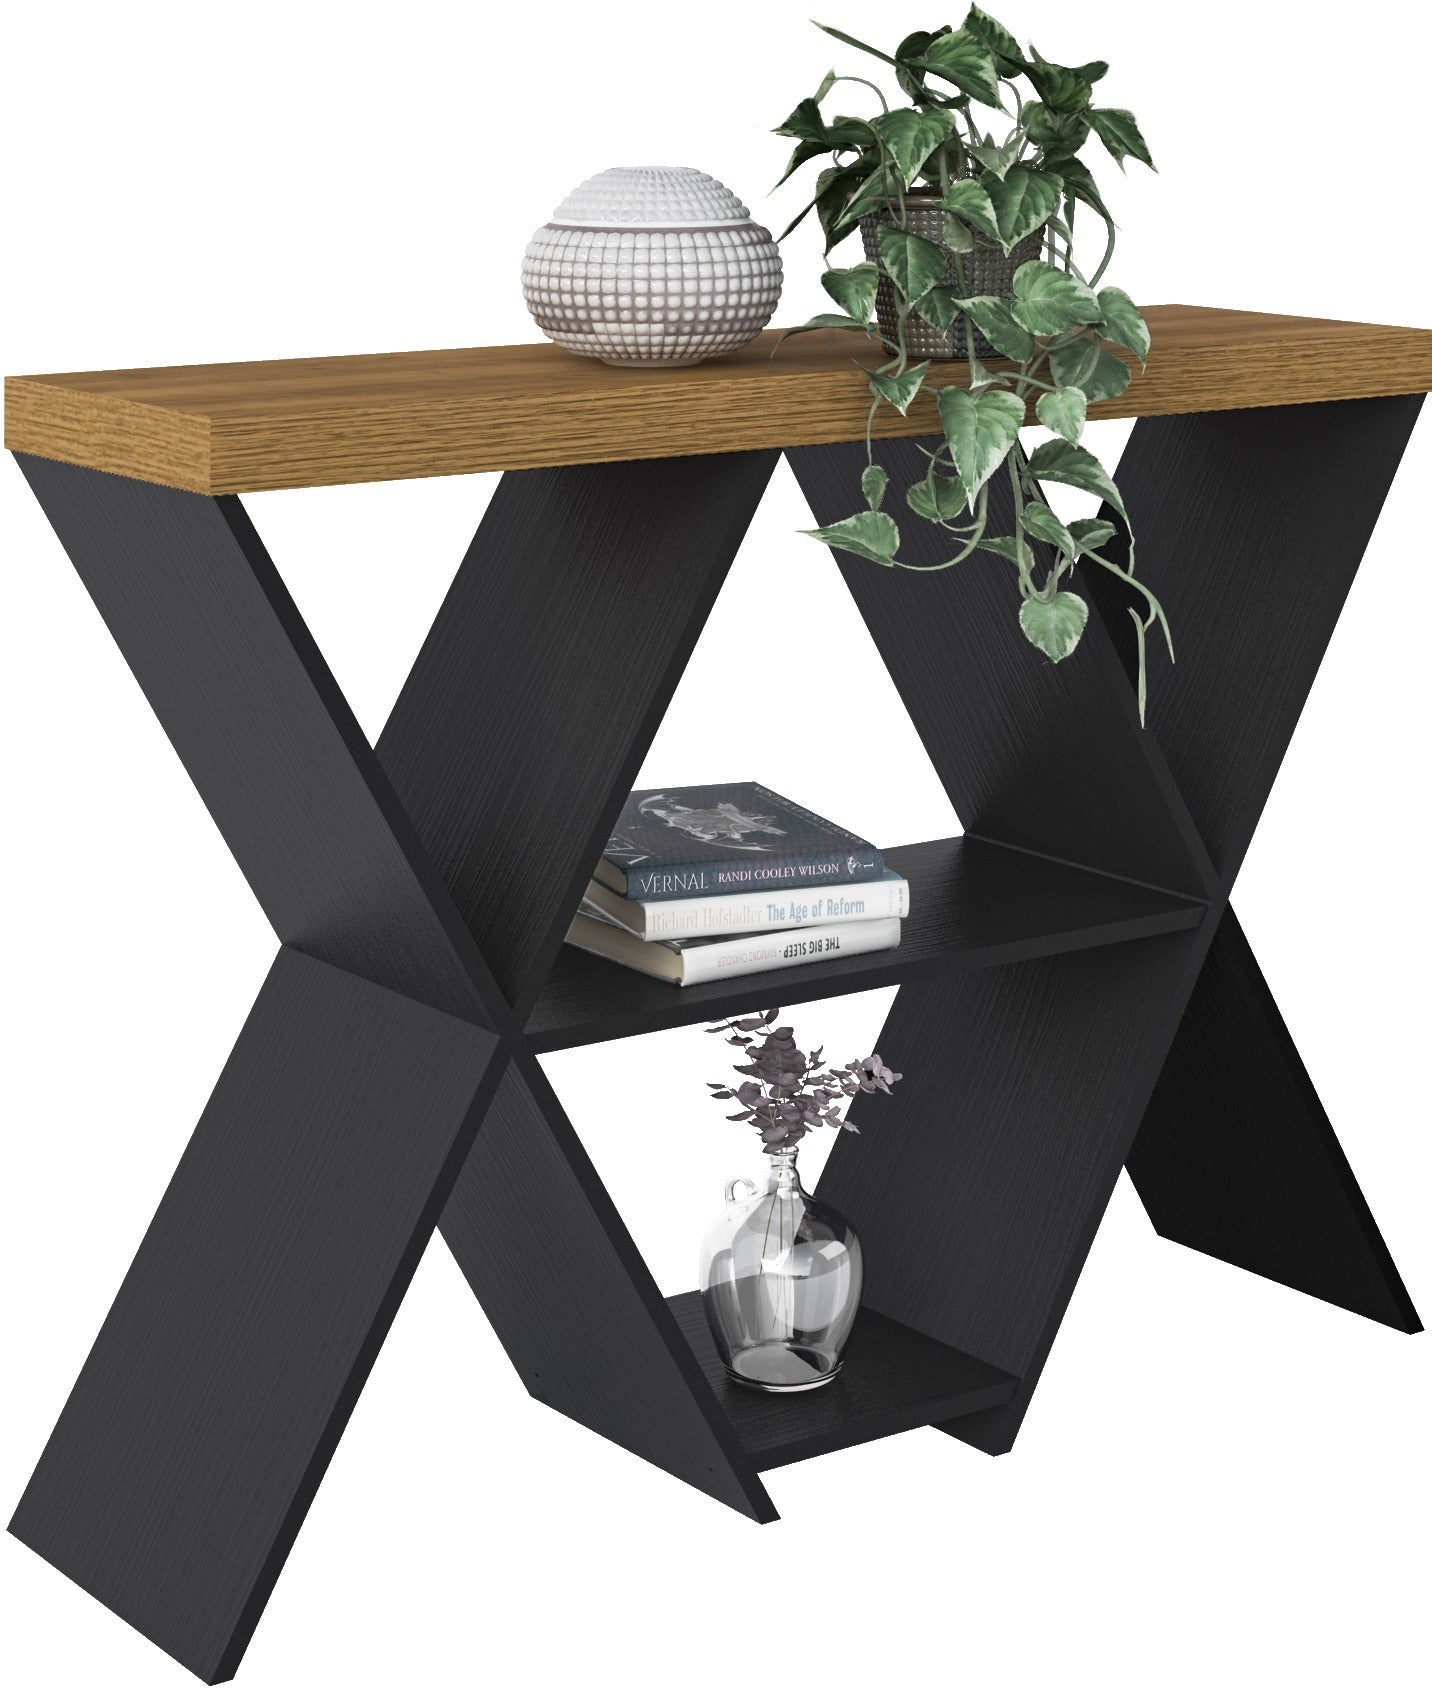 NAPLES-CONSOLE-TABLE-BLACK-AND-PINE-EFFECT-2021-300-304-027-1.jpg